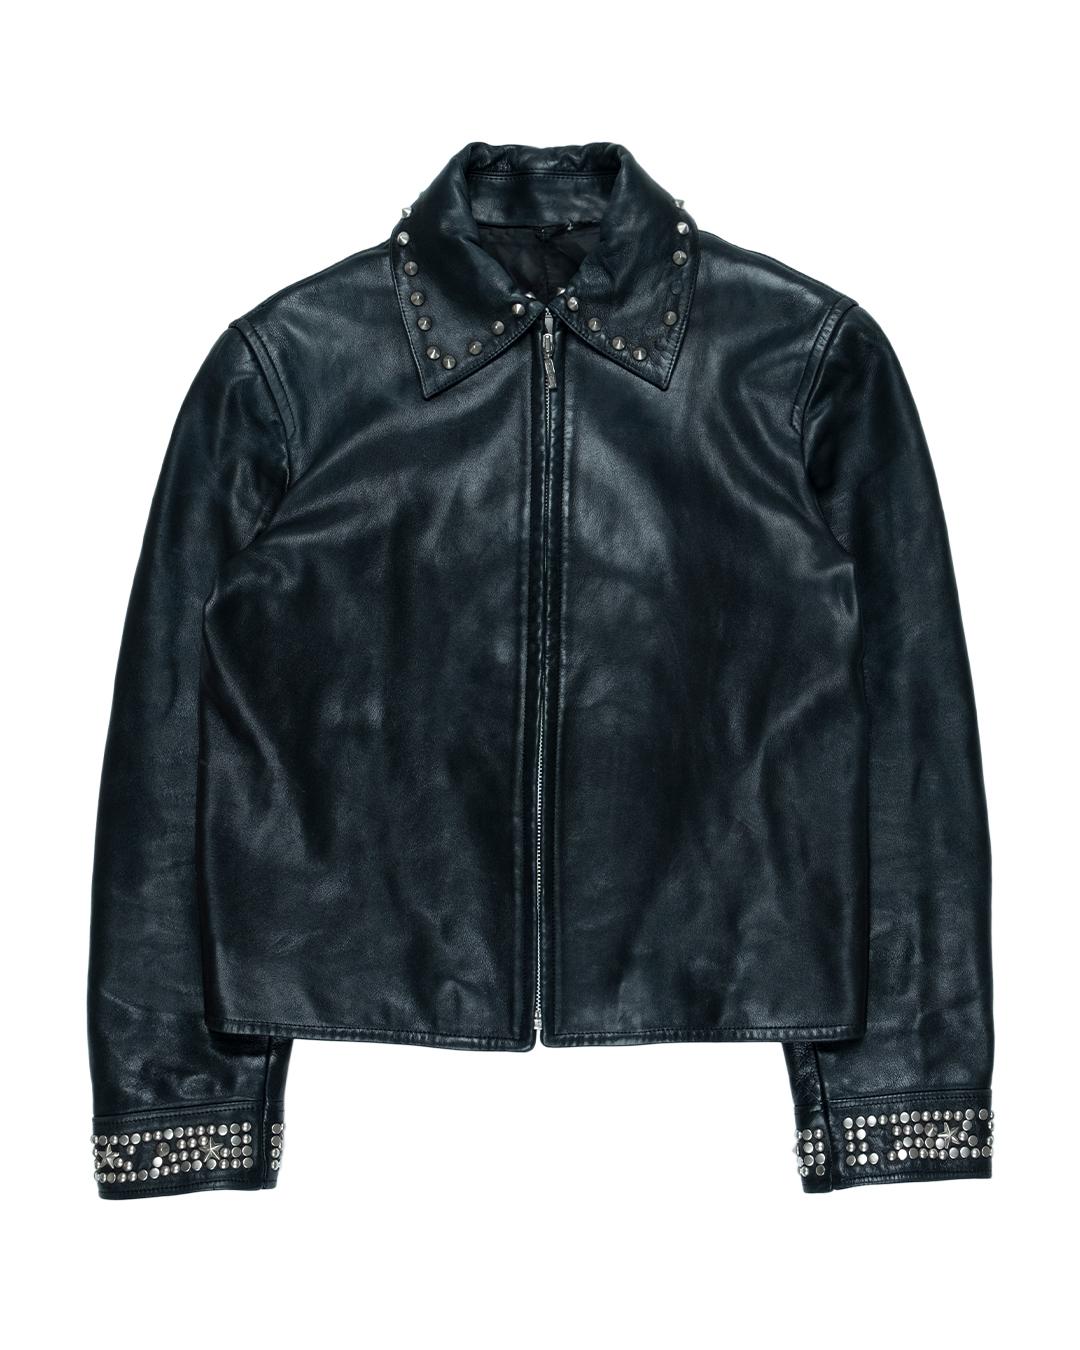 Women's Gianni Versace Studded Leather Jacket For Sale